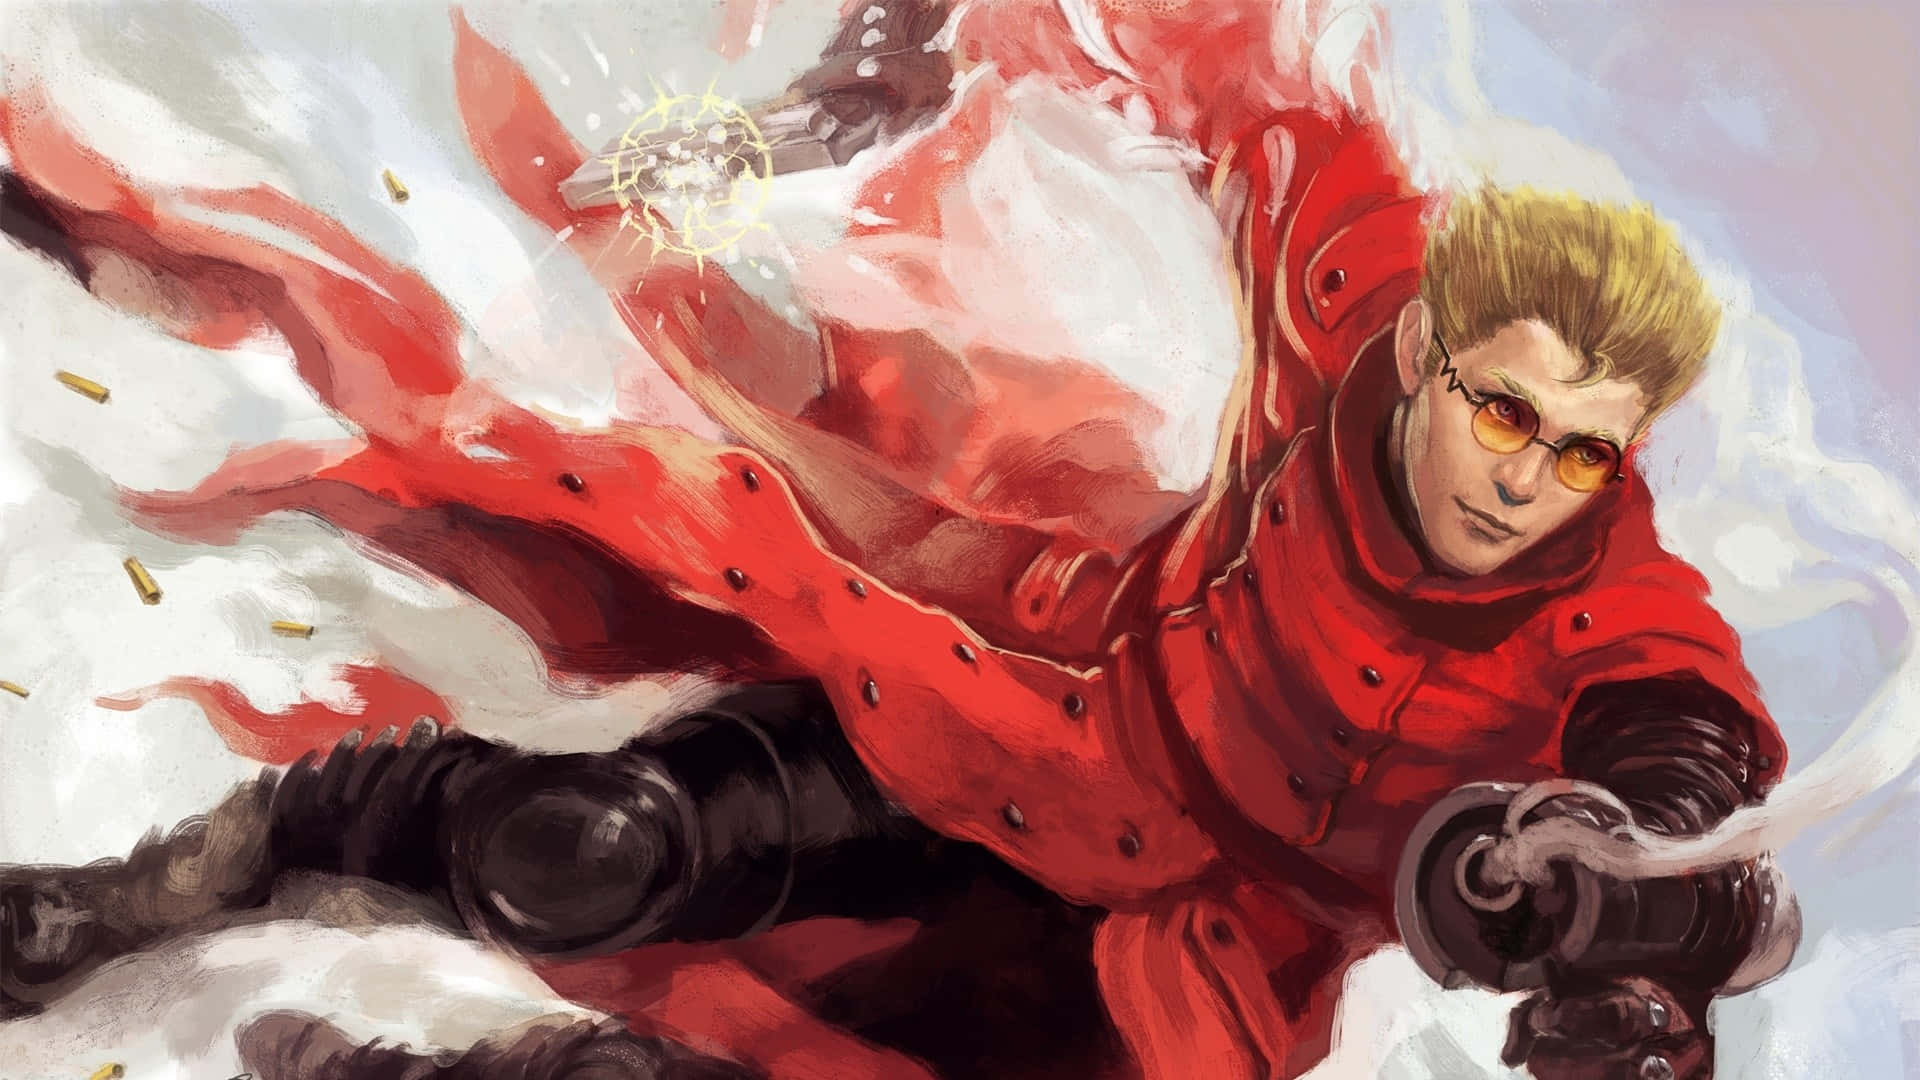 Vash the Stampede - Unleashing Power in a Tense Moment Wallpaper